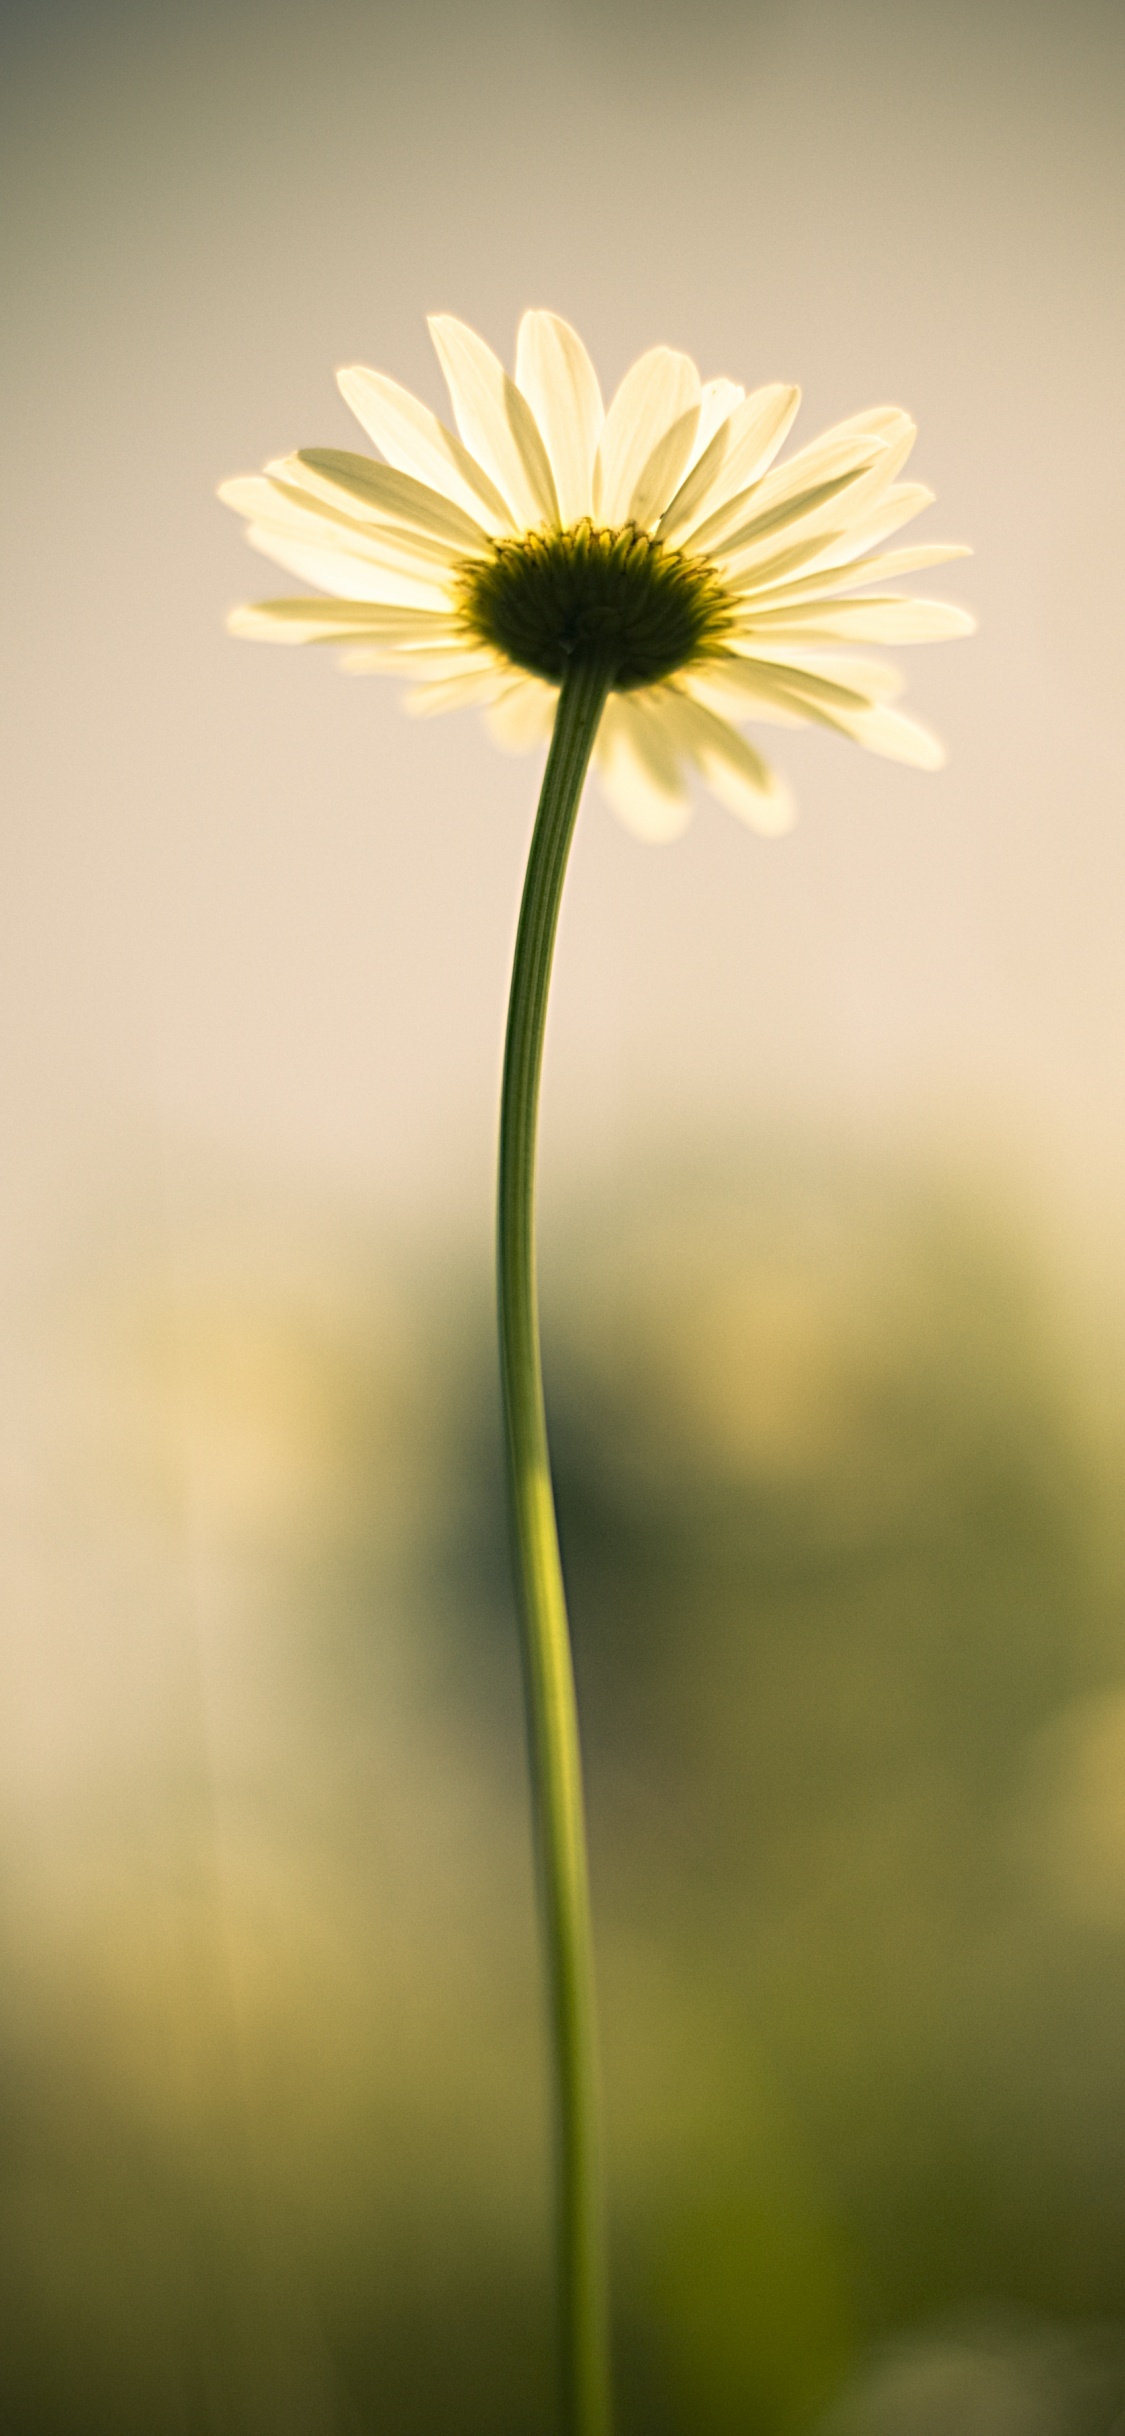 White and Yellow Daisy in Bloom. Wallpaper in 1125x2436 Resolution